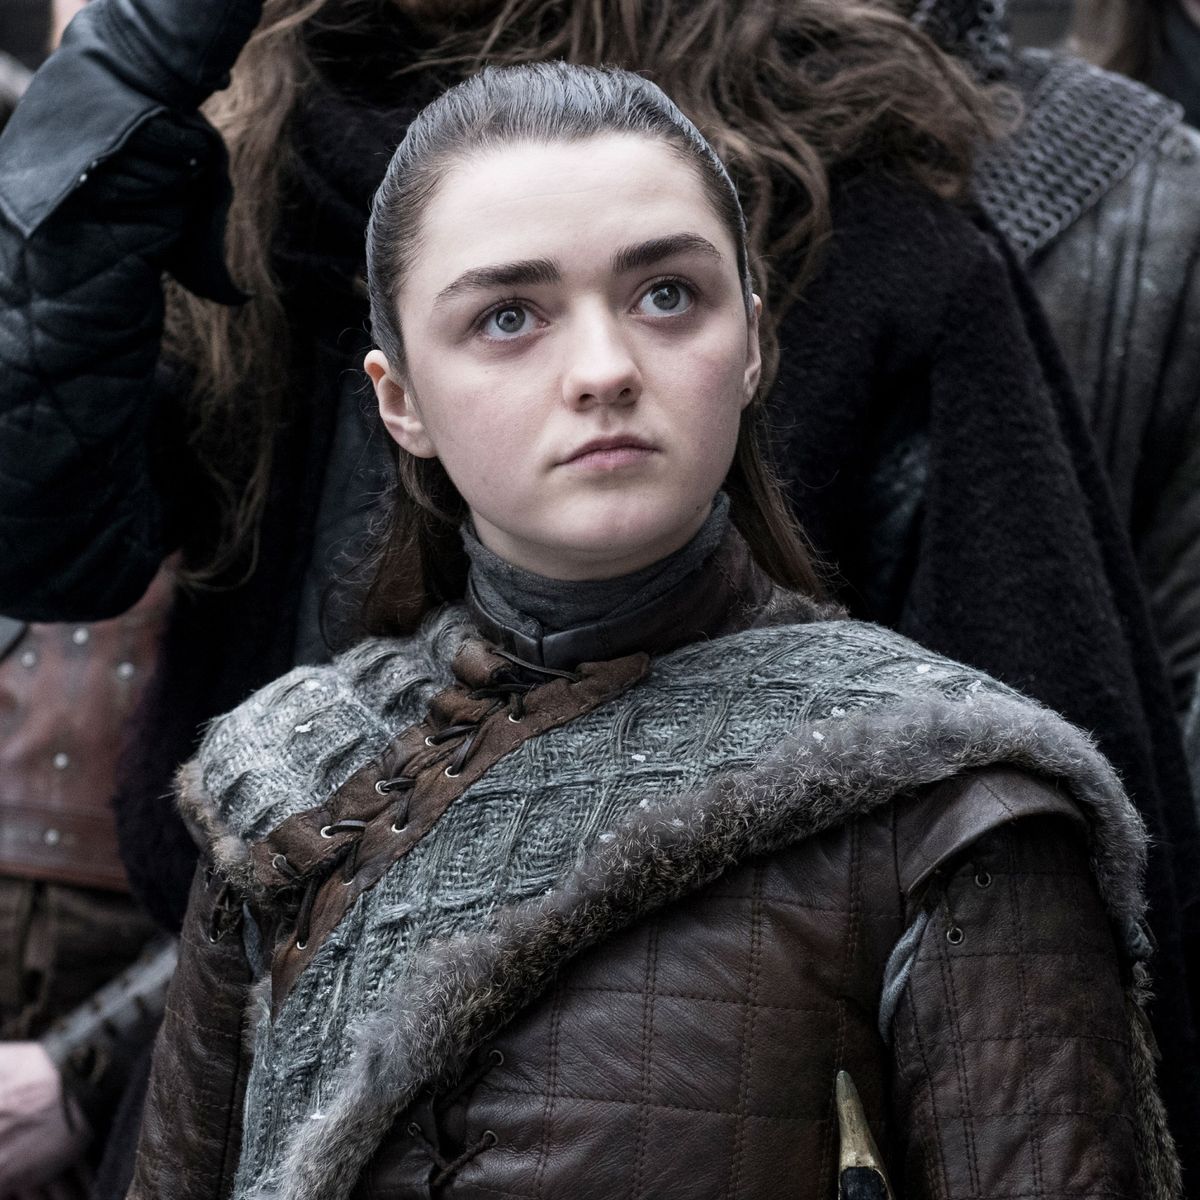 Our new 'Game of Thrones' hero: A 10-year-old badass - CNET